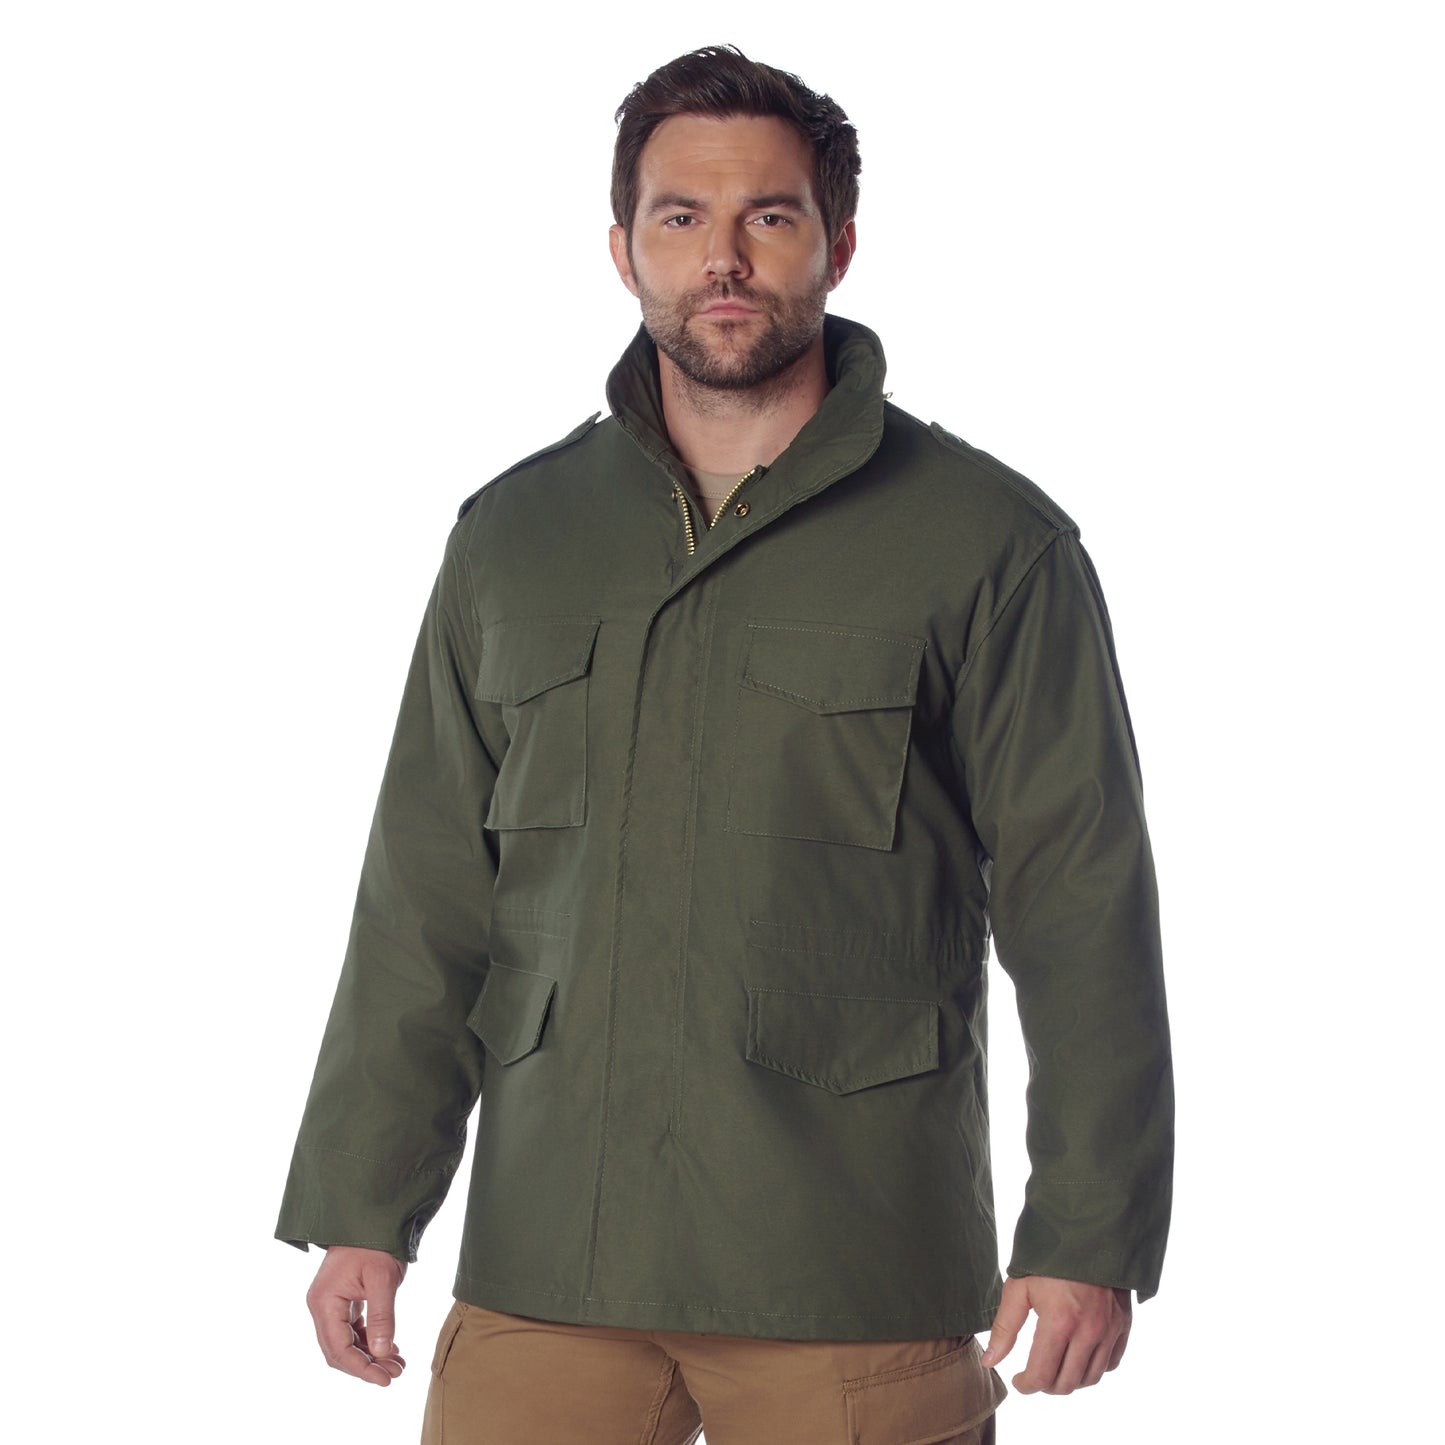 Rothco M-65 Field Jacket With Liner - Olive Drab